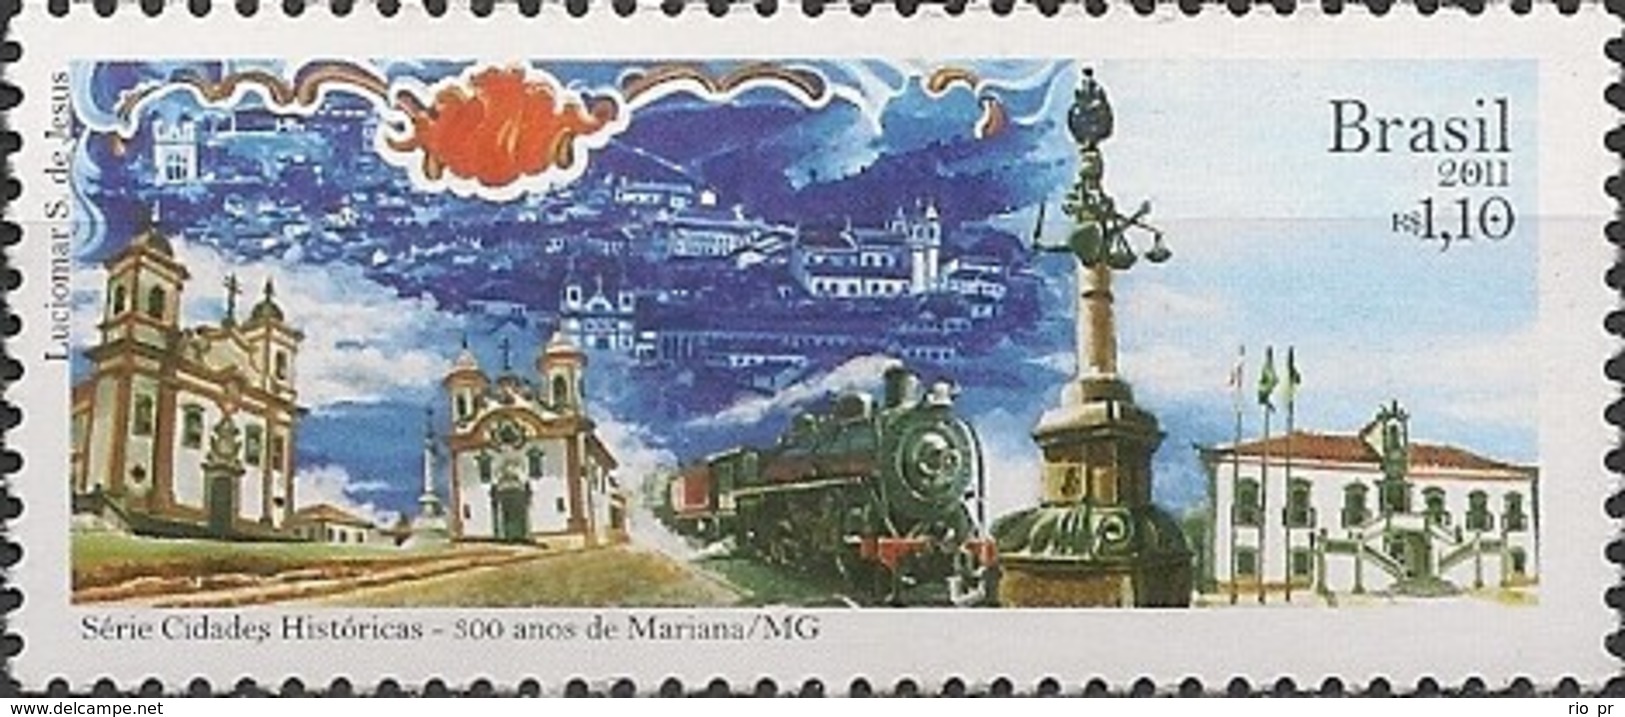 BRAZIL - HISTORICAL TOWNS SERIES, 300 YEARS OF MARIANA/MG 2011 - MNH - Nuovi